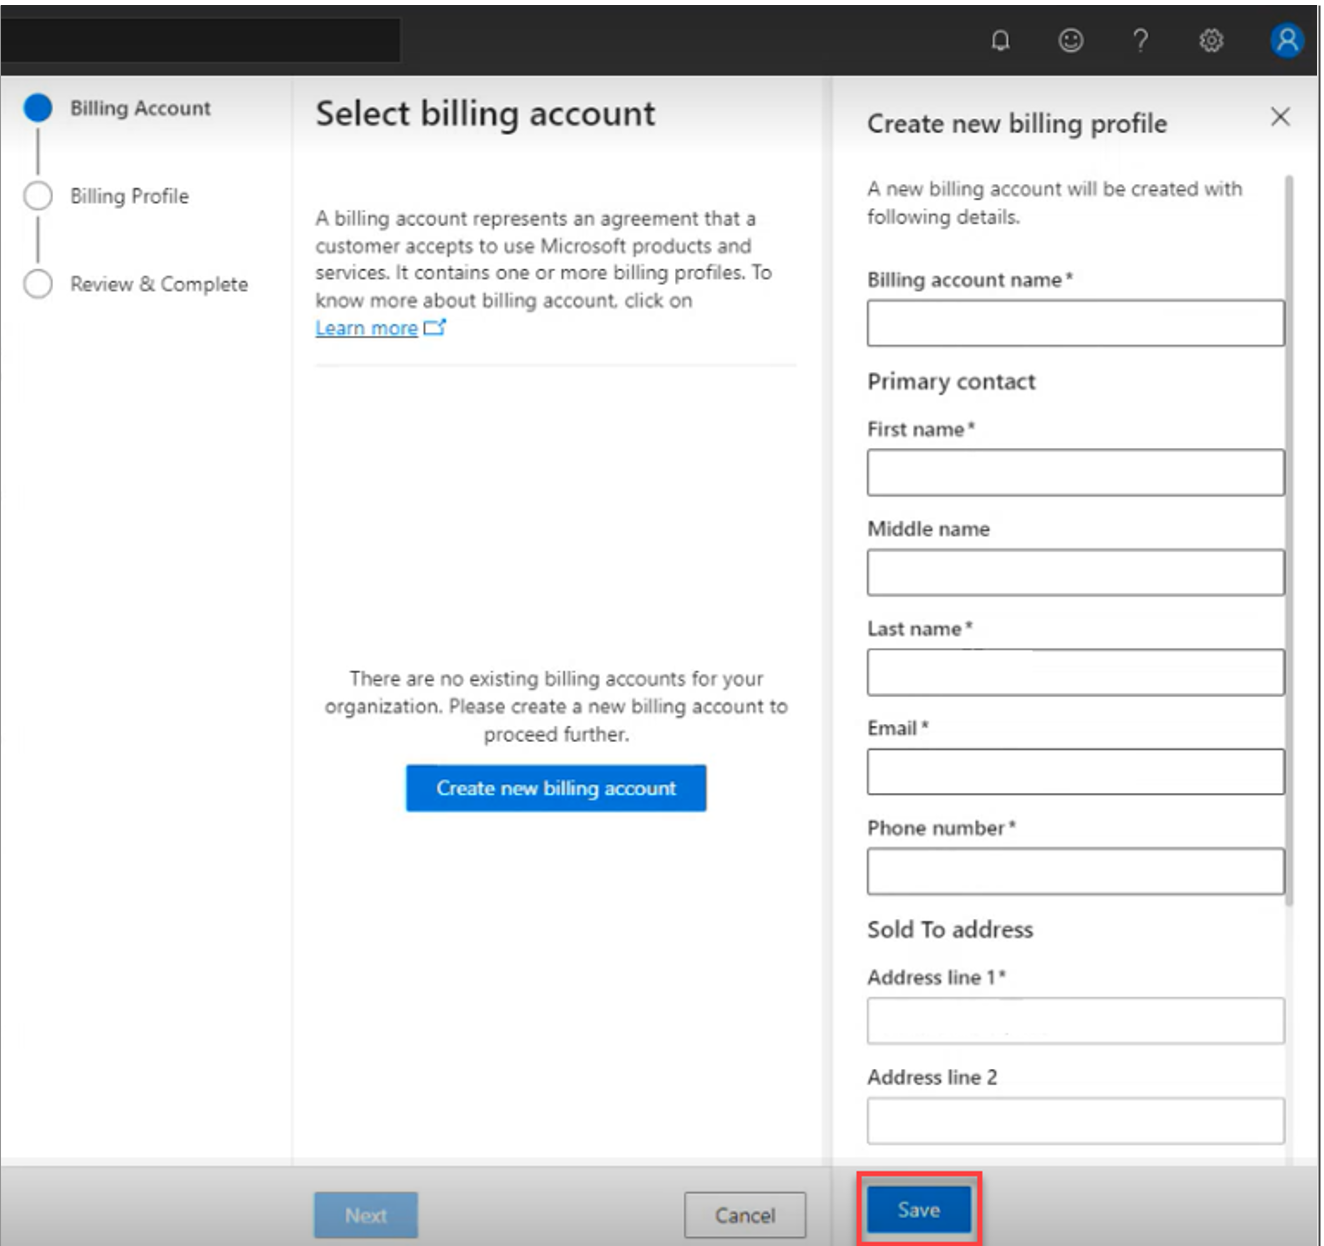 Screenshot of the Create new billing profile flyout, under Select billing account, under the Billing profile page.